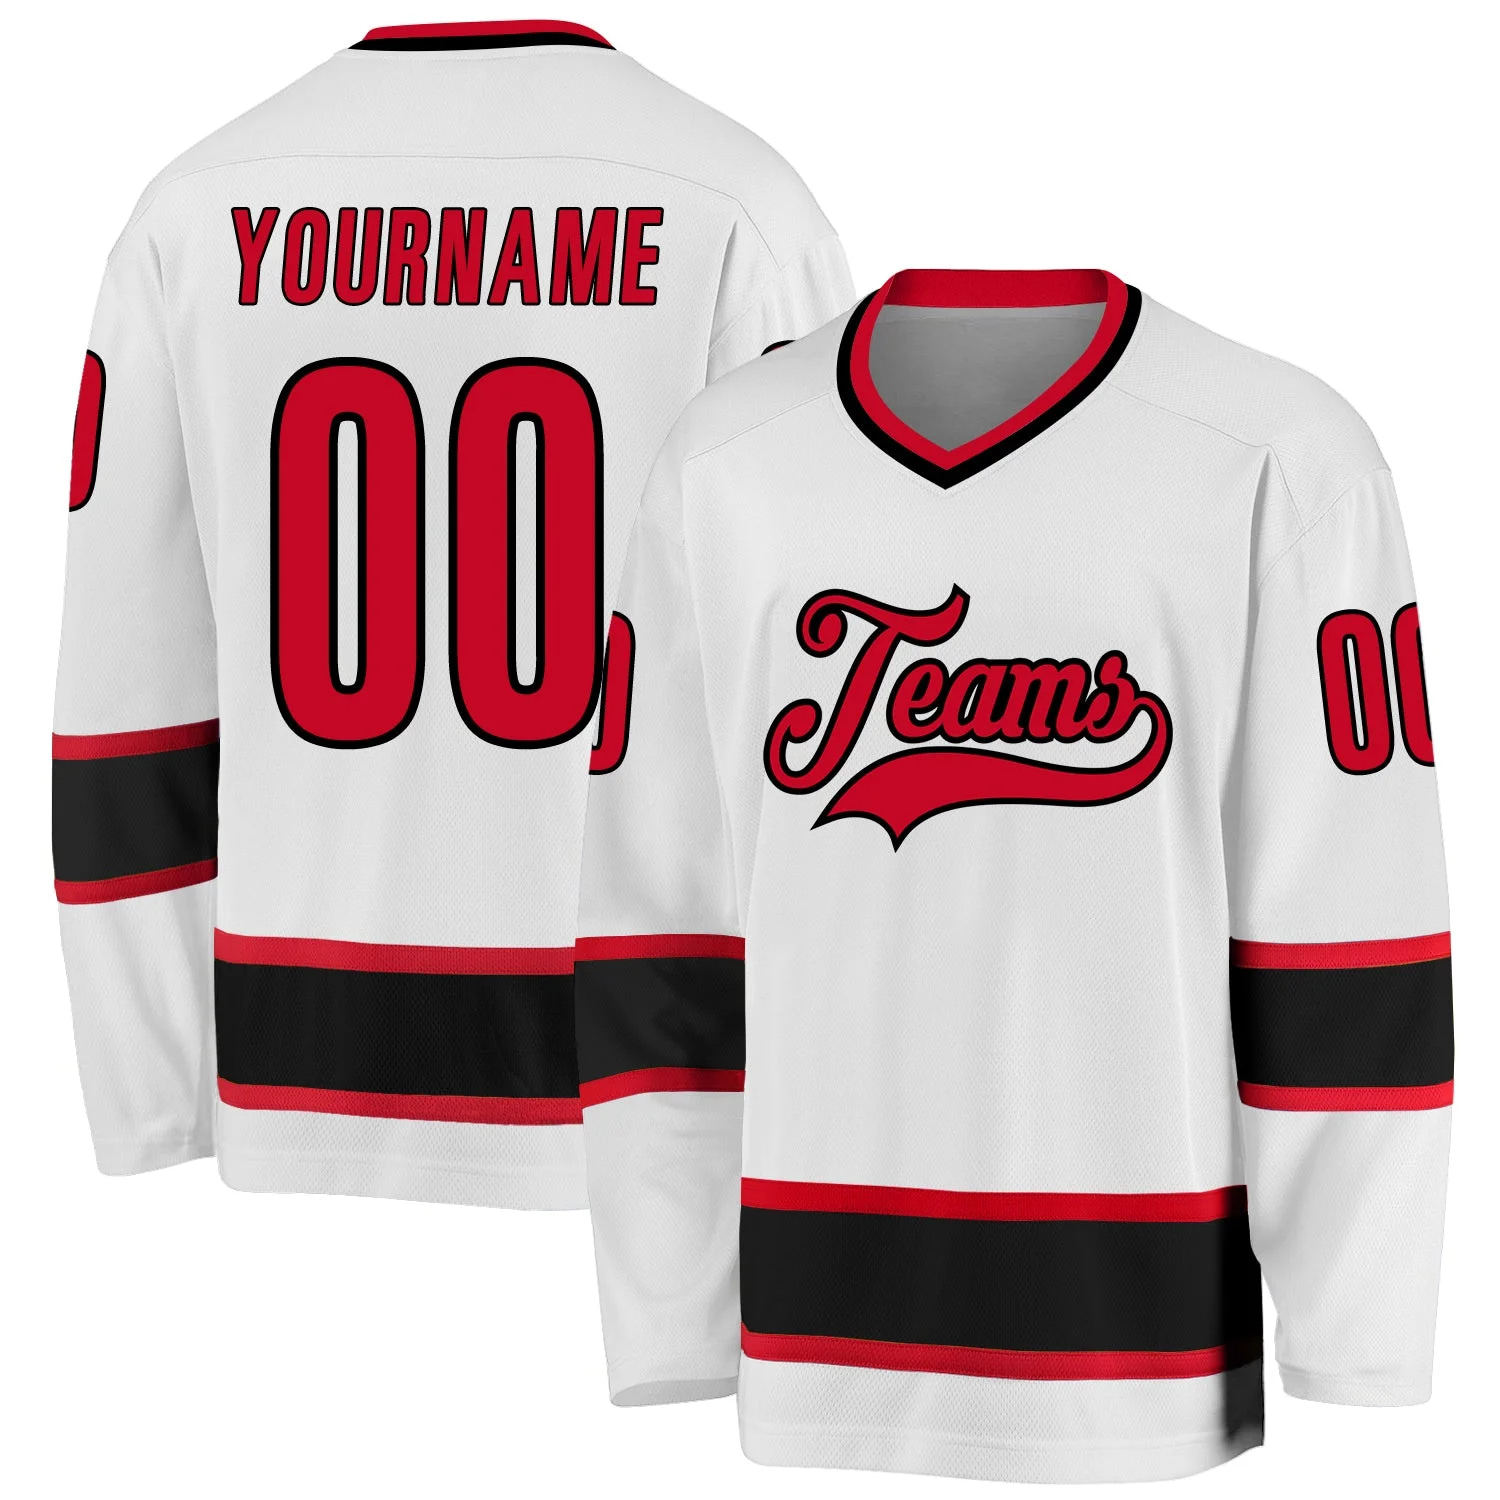 Stitched And Print White Red-black Hockey Jersey Custom